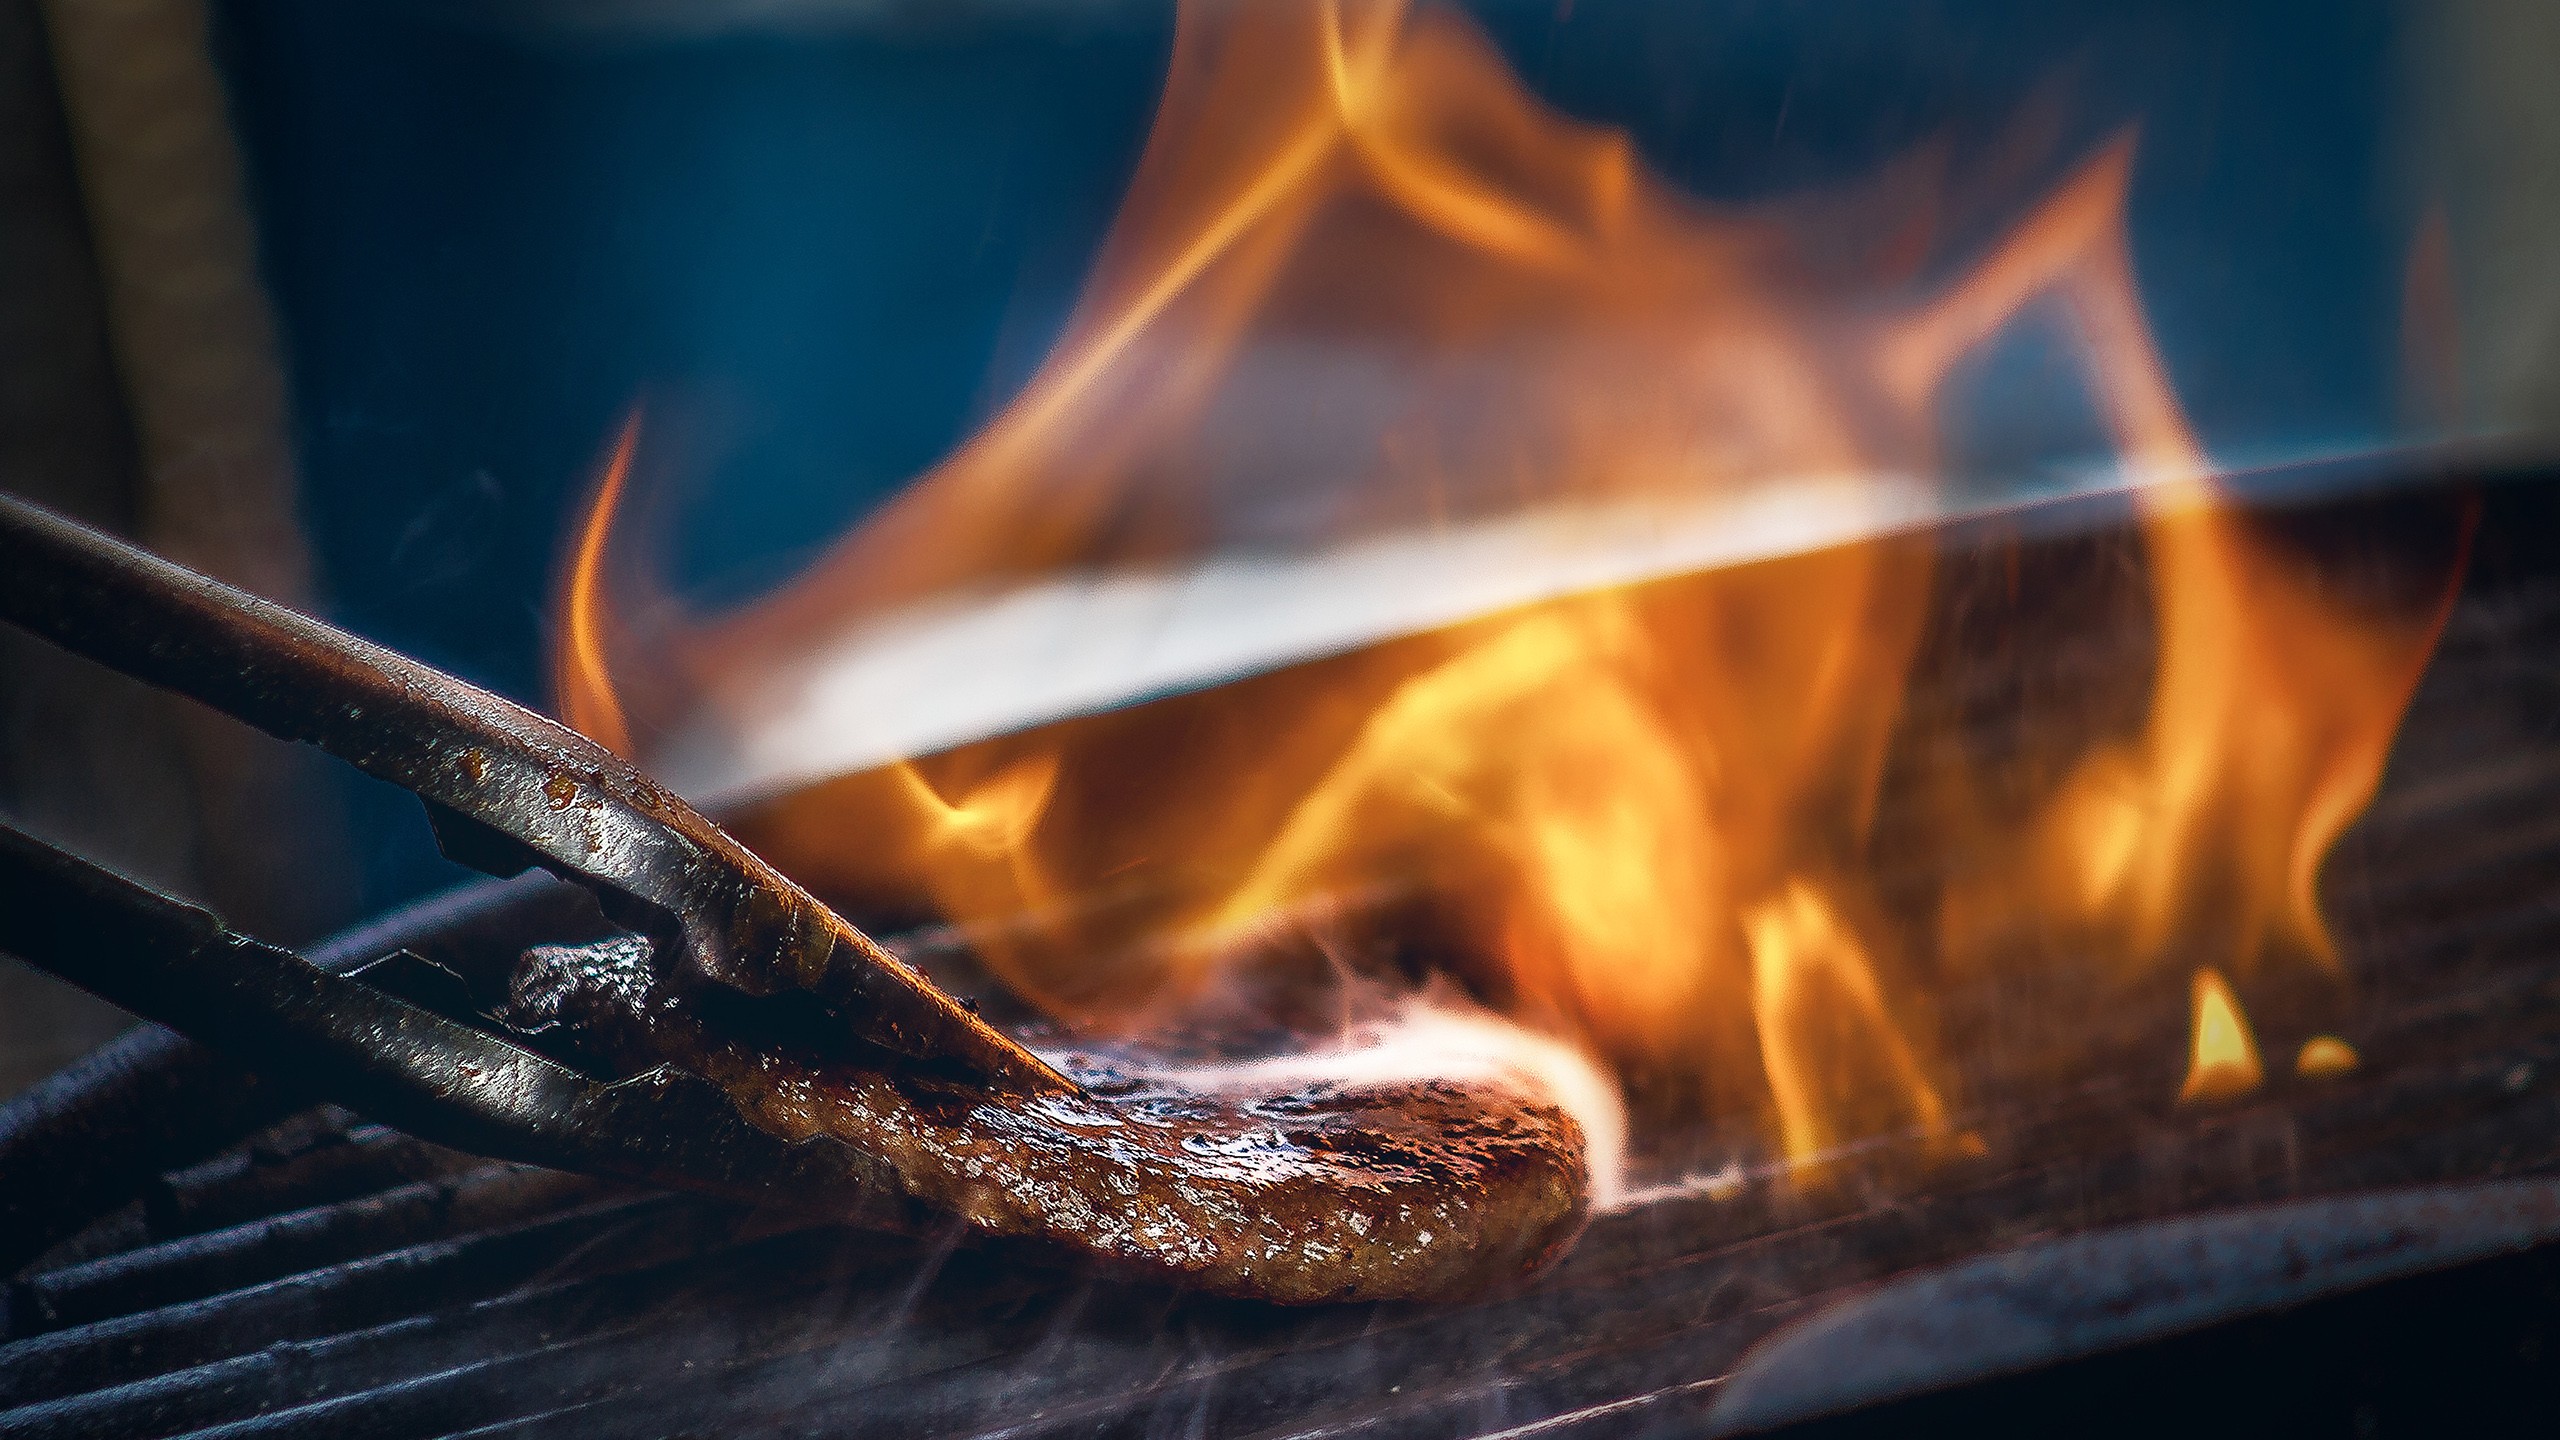 Steak Fire Animals Cow Flesh Muscles Death Barbecue Grill Closeup 2560x1440